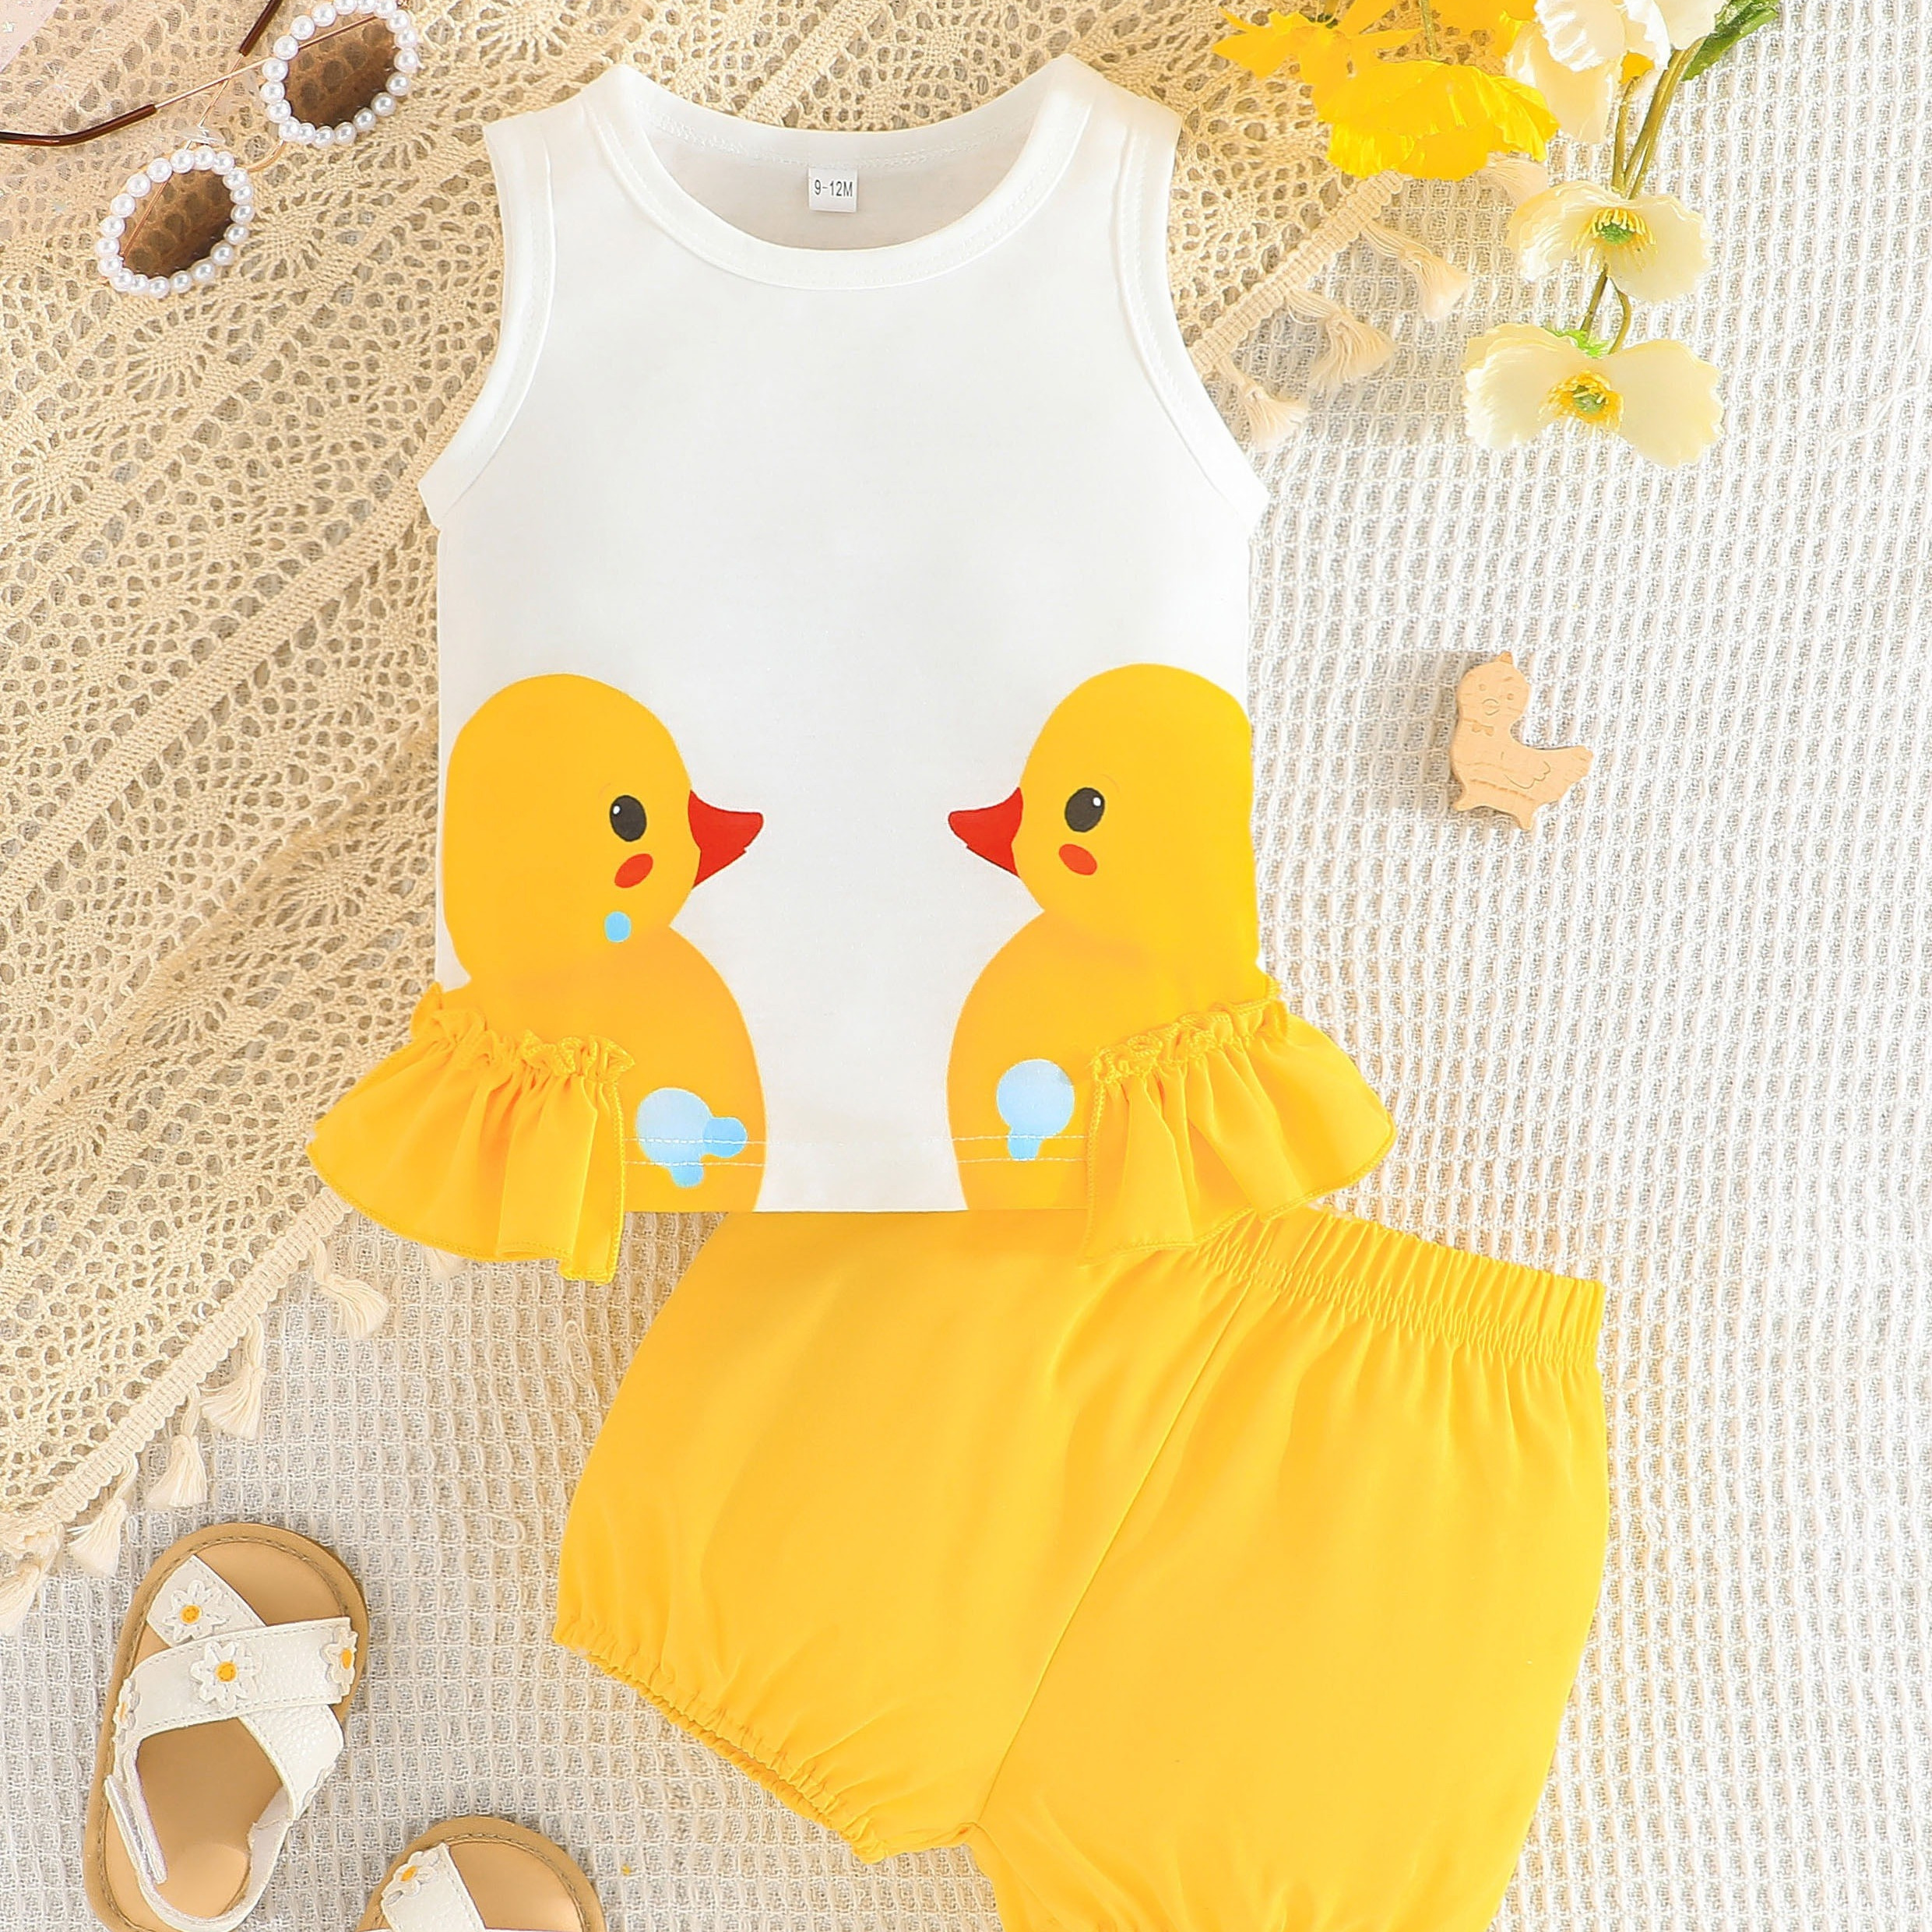 

Baby's Cartoon Duck Print 2pcs Casual Summer Outfit, Ruffle Decor Tank Top & Shorts Set, Toddler & Infant Girl's Clothes For Daily/holiday, As Gift